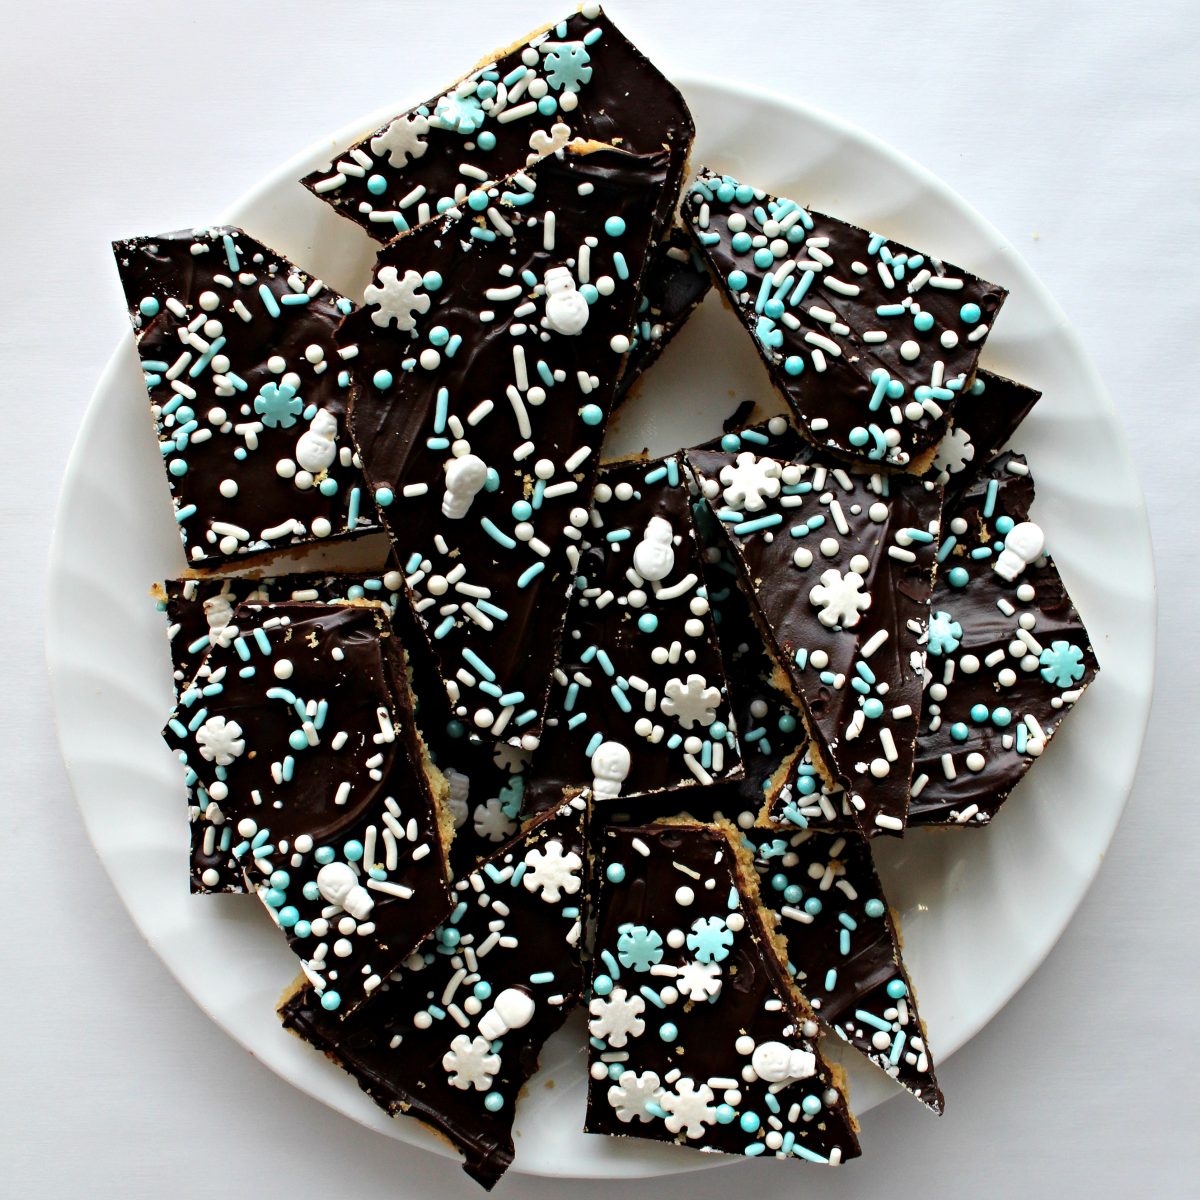 Dark chocolate Sugar Cookie Bark cut into individual servings on a plate.